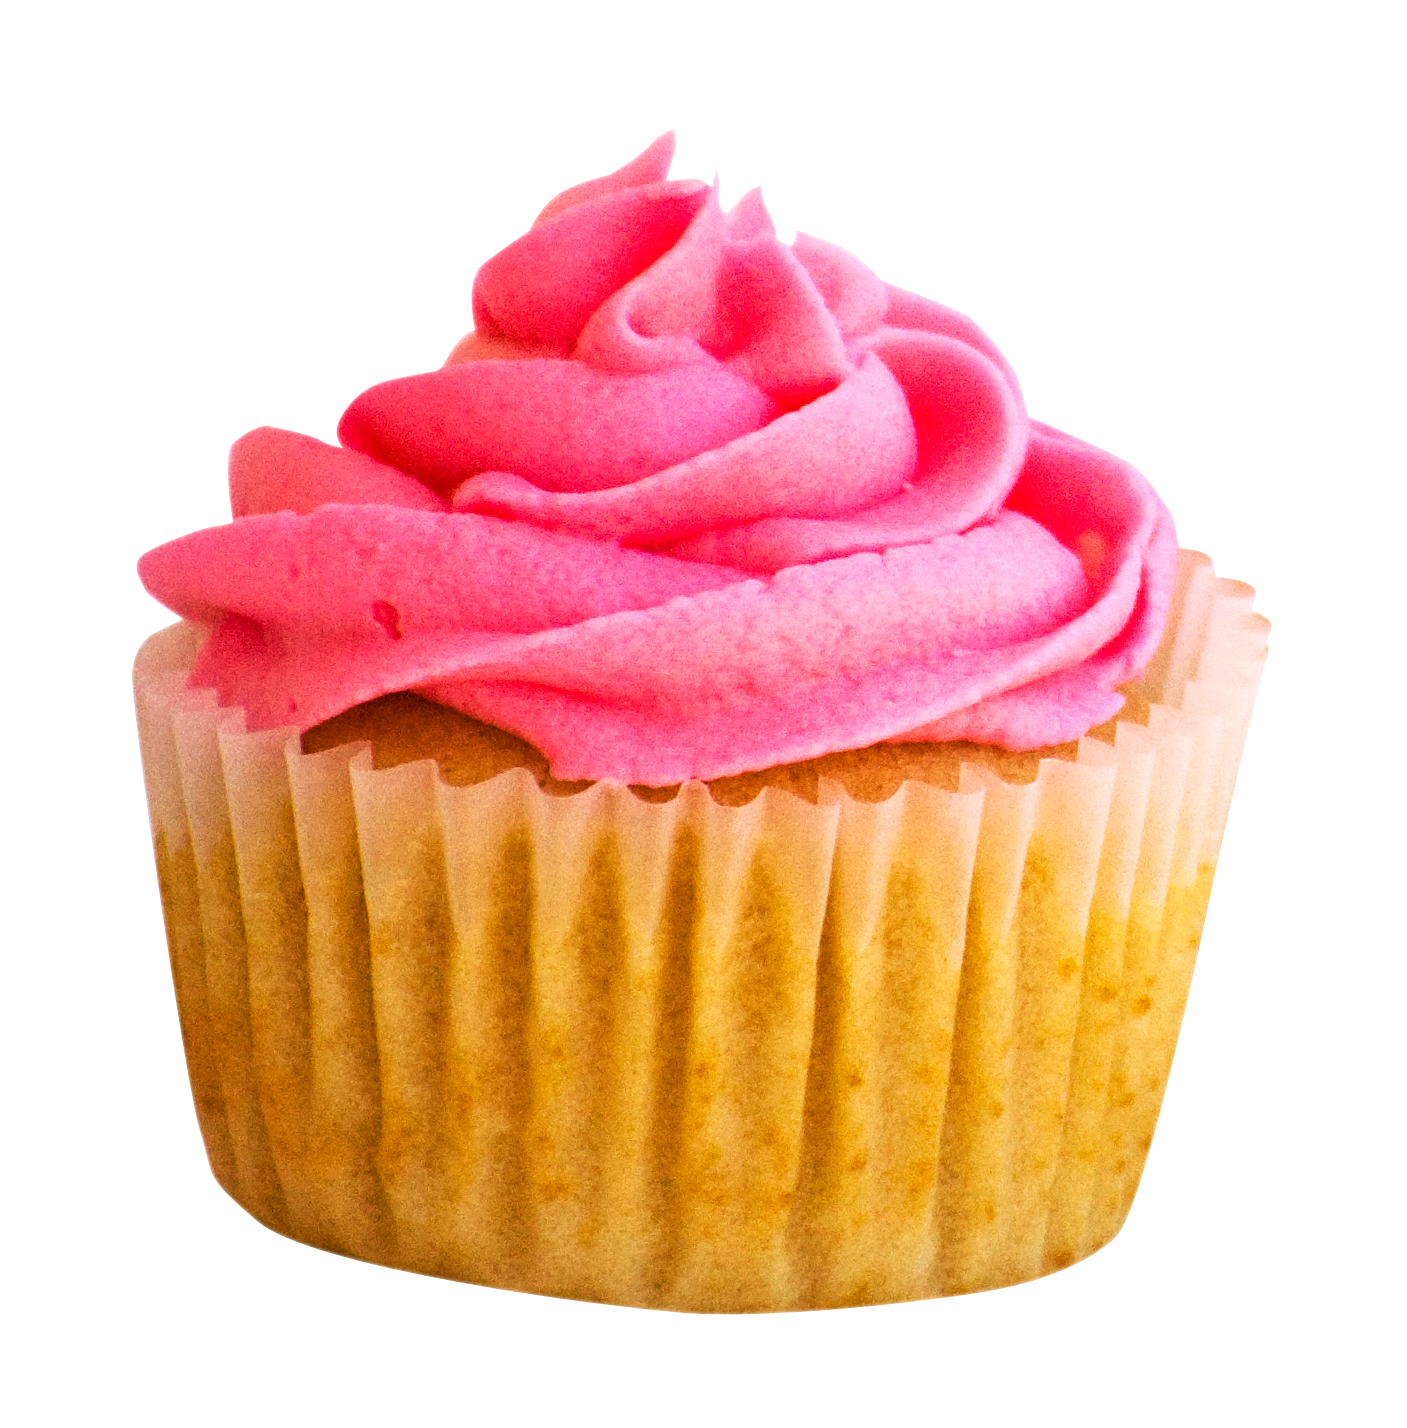 Pink Frosted Cupcake Isolated PNG image